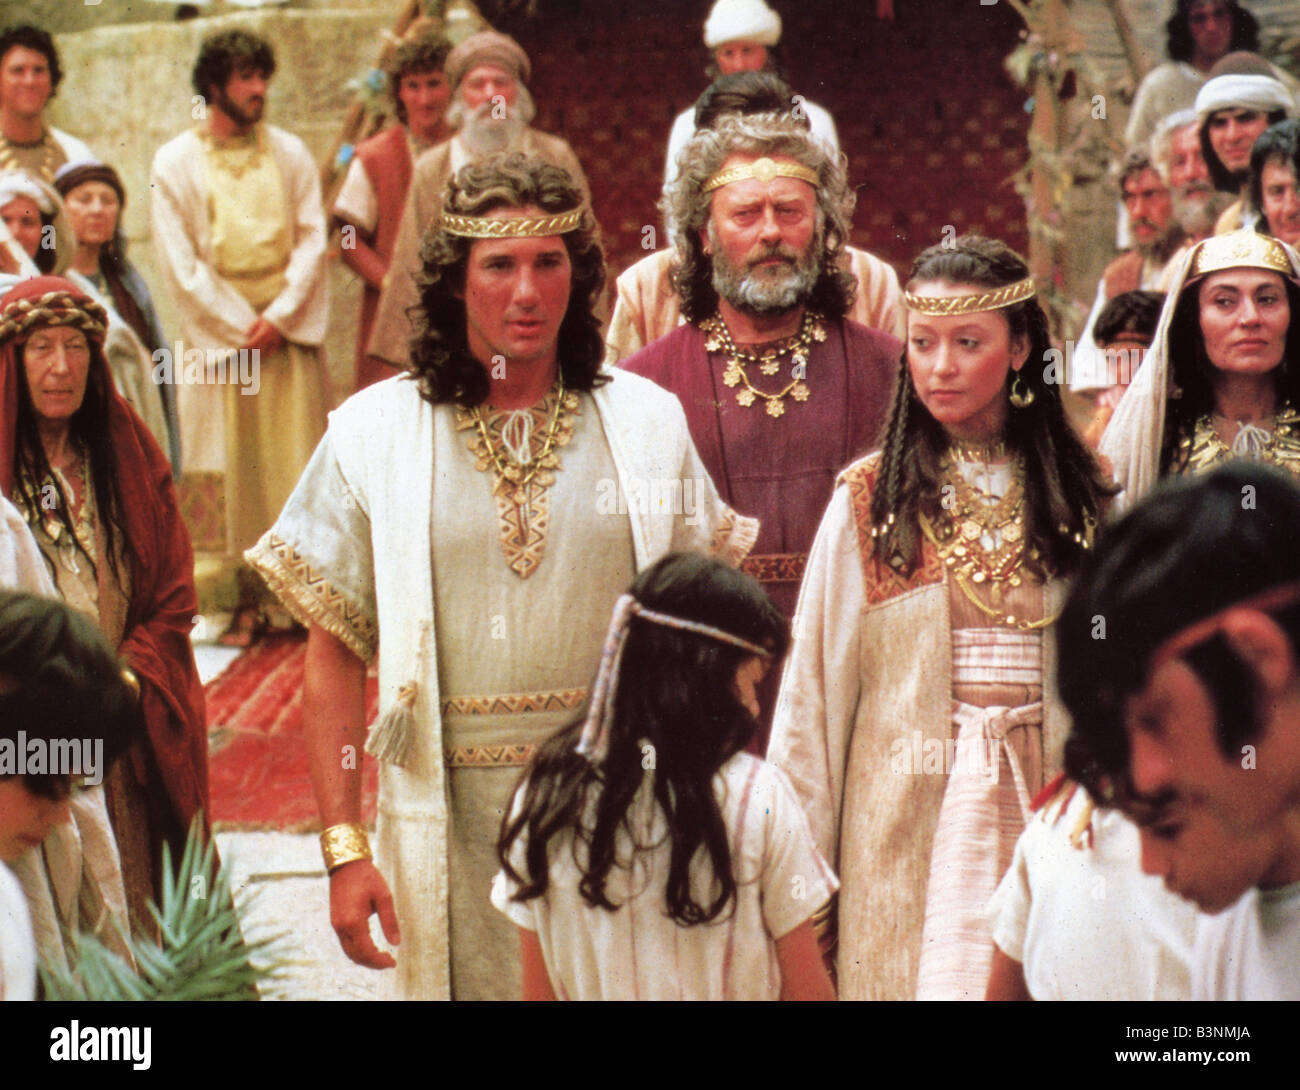 KING DAVID  1985 Paramount film with Richard Geere and Cherie Lunghi Stock Photo